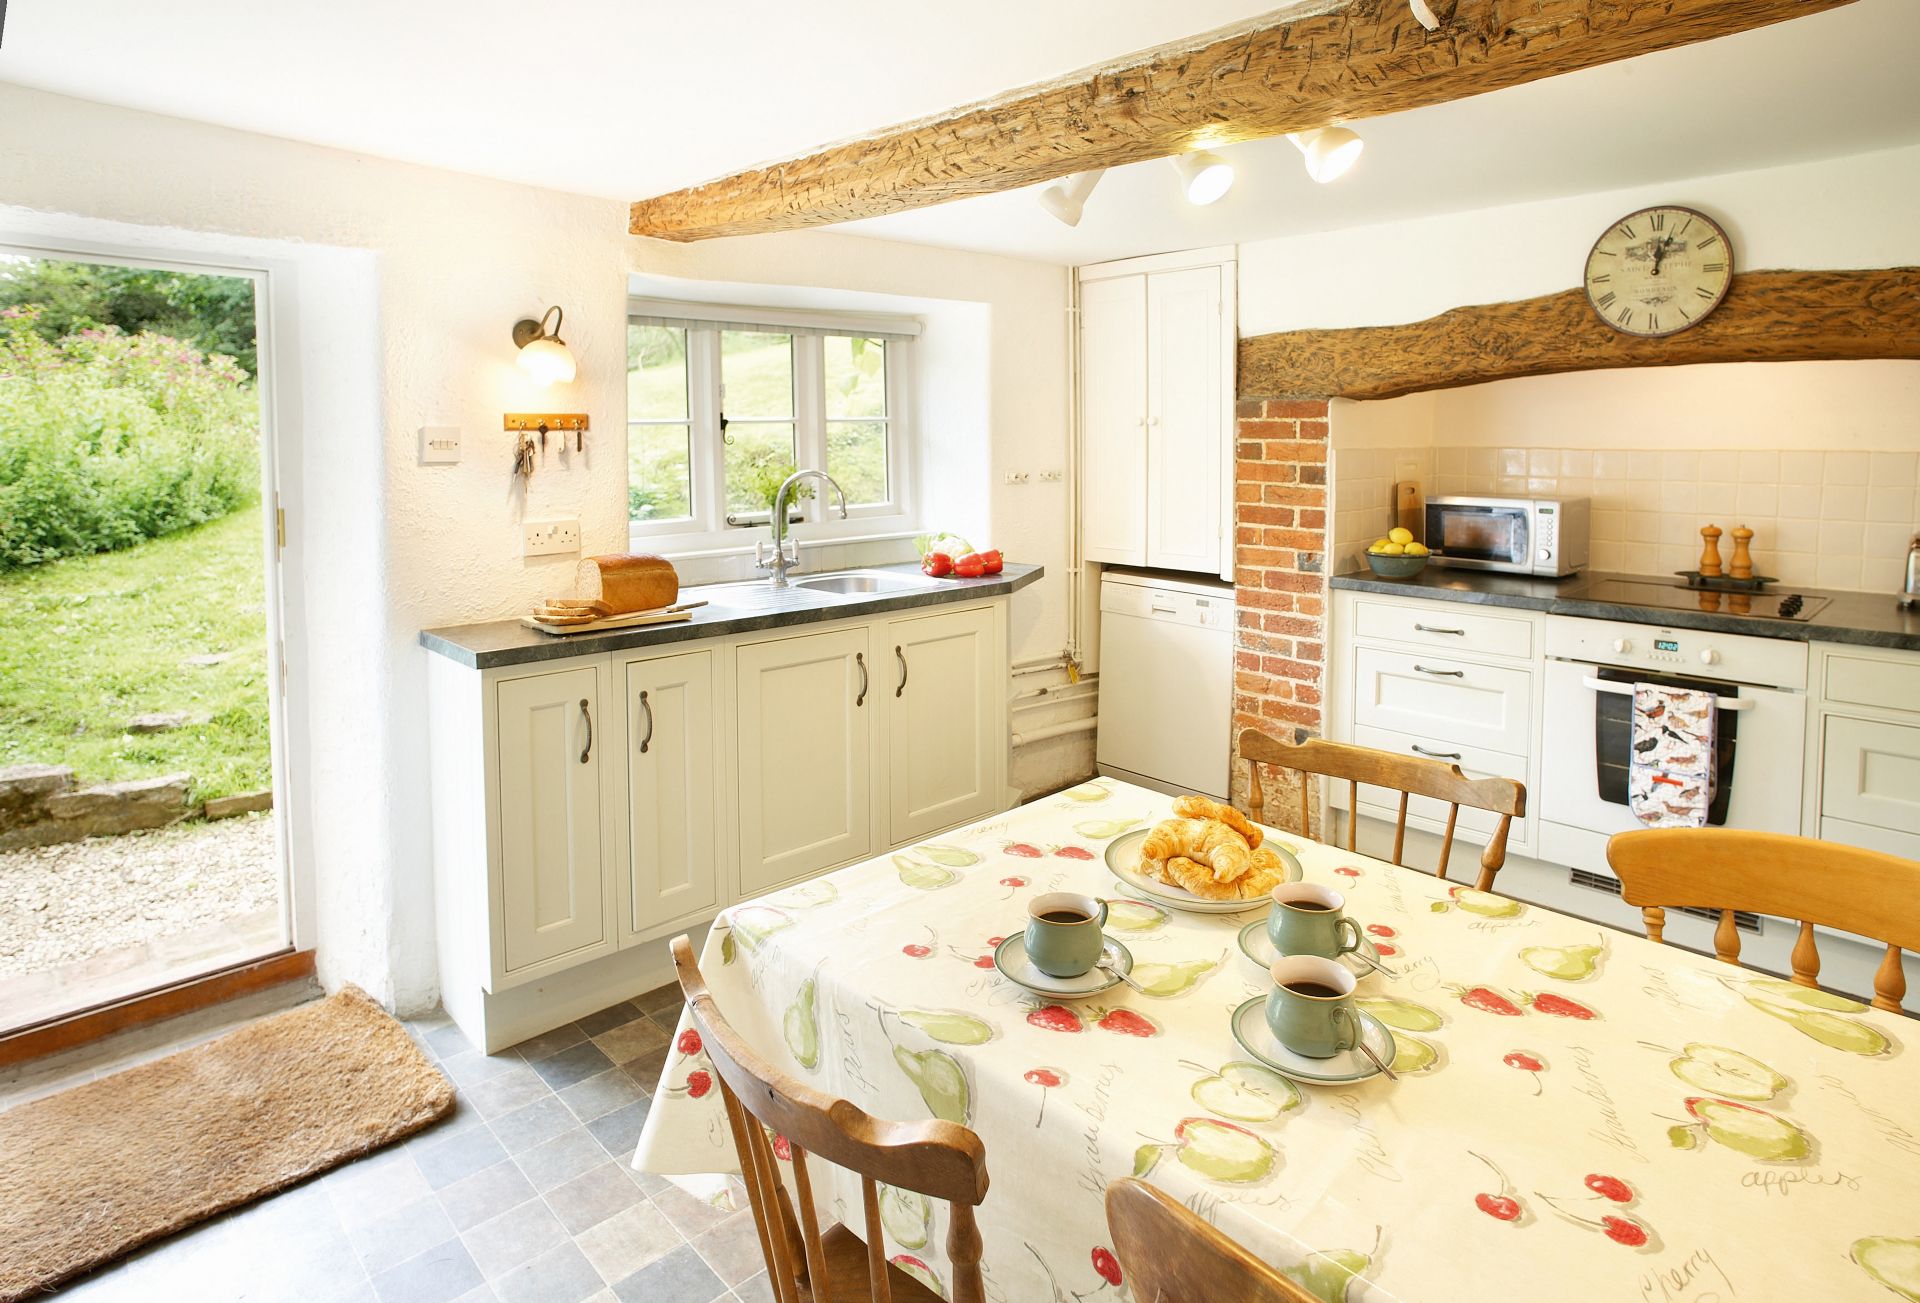 Magna Cottage is located in Shaftesbury and surrounding villages